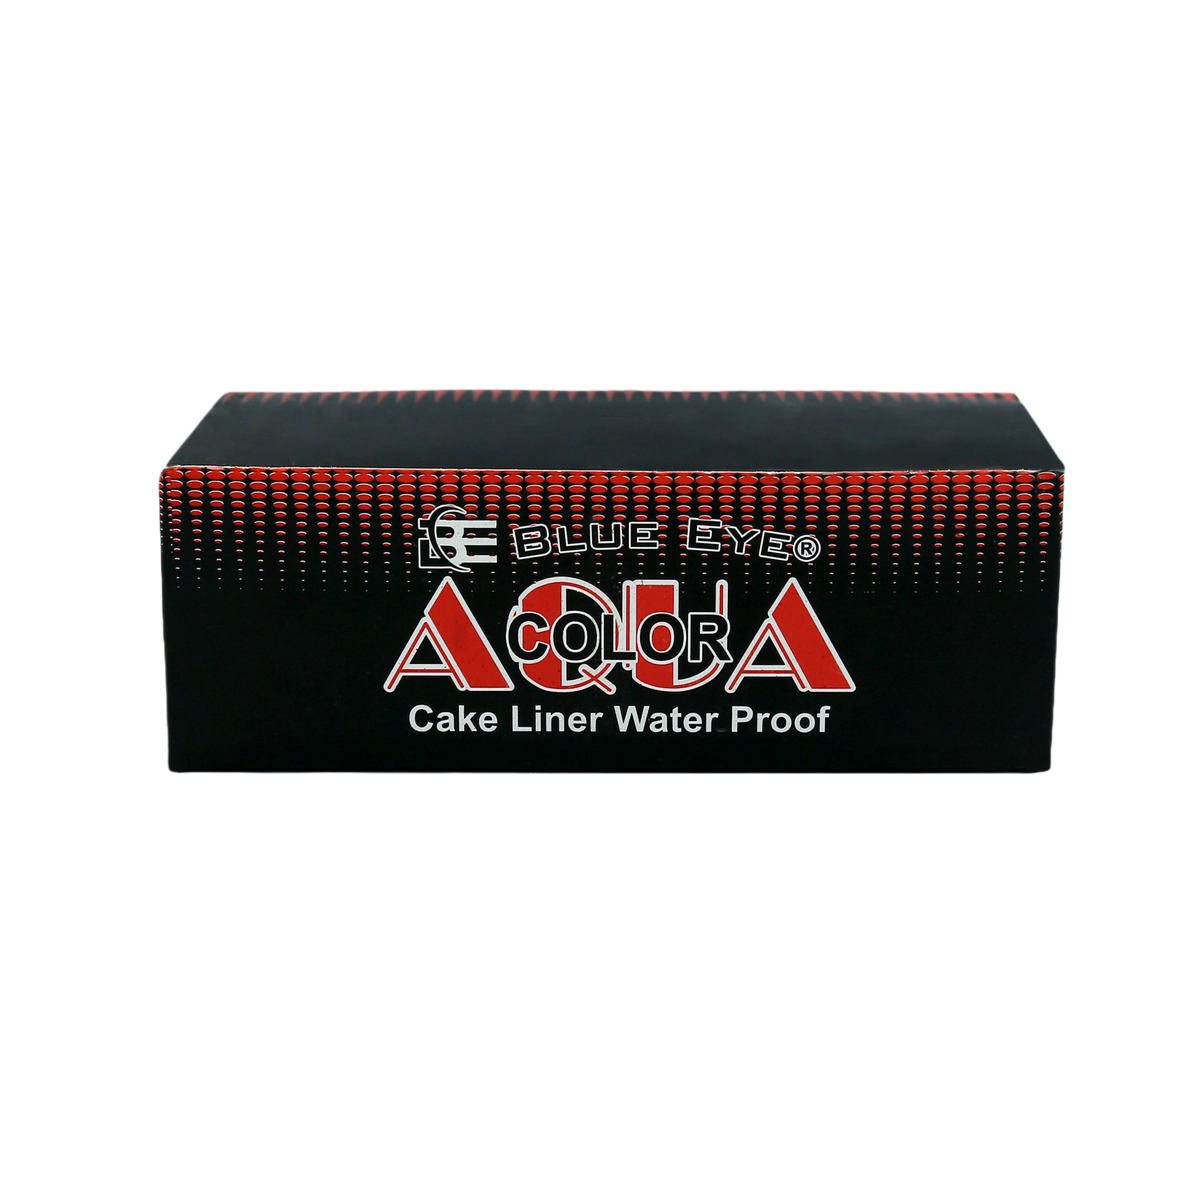 Aqua Color Cake Liner Water Proof Blue 18Gms freeshipping - lasertag.pk